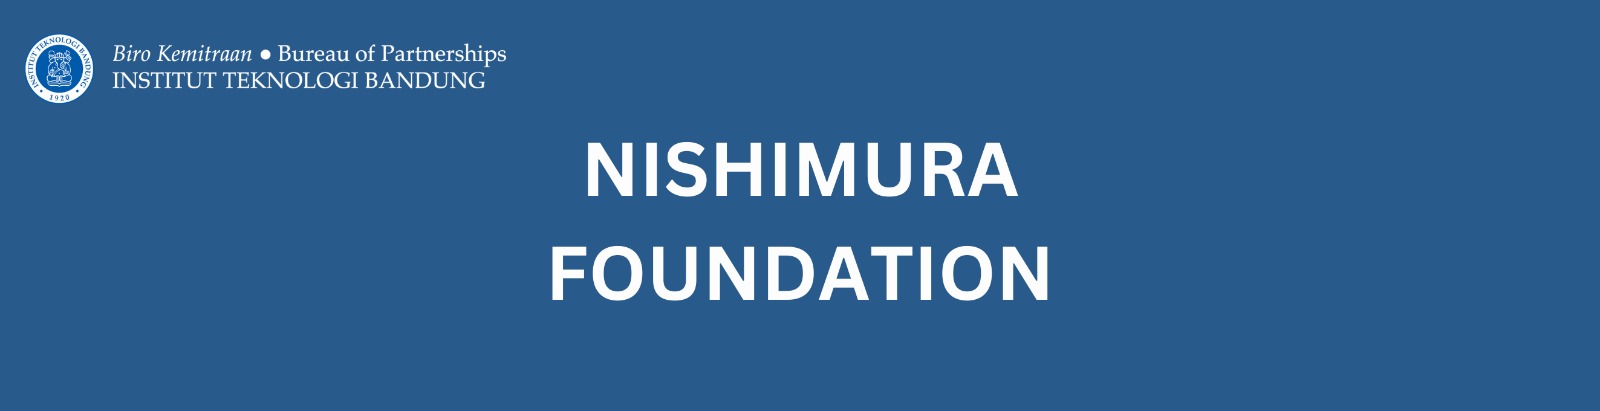 LIFE SUPPORT SCHOLARSHIP OFFER NISHIMURA FOUNDATION (ALUMNI of S1 and S2 ITB, UGM, AND UI)